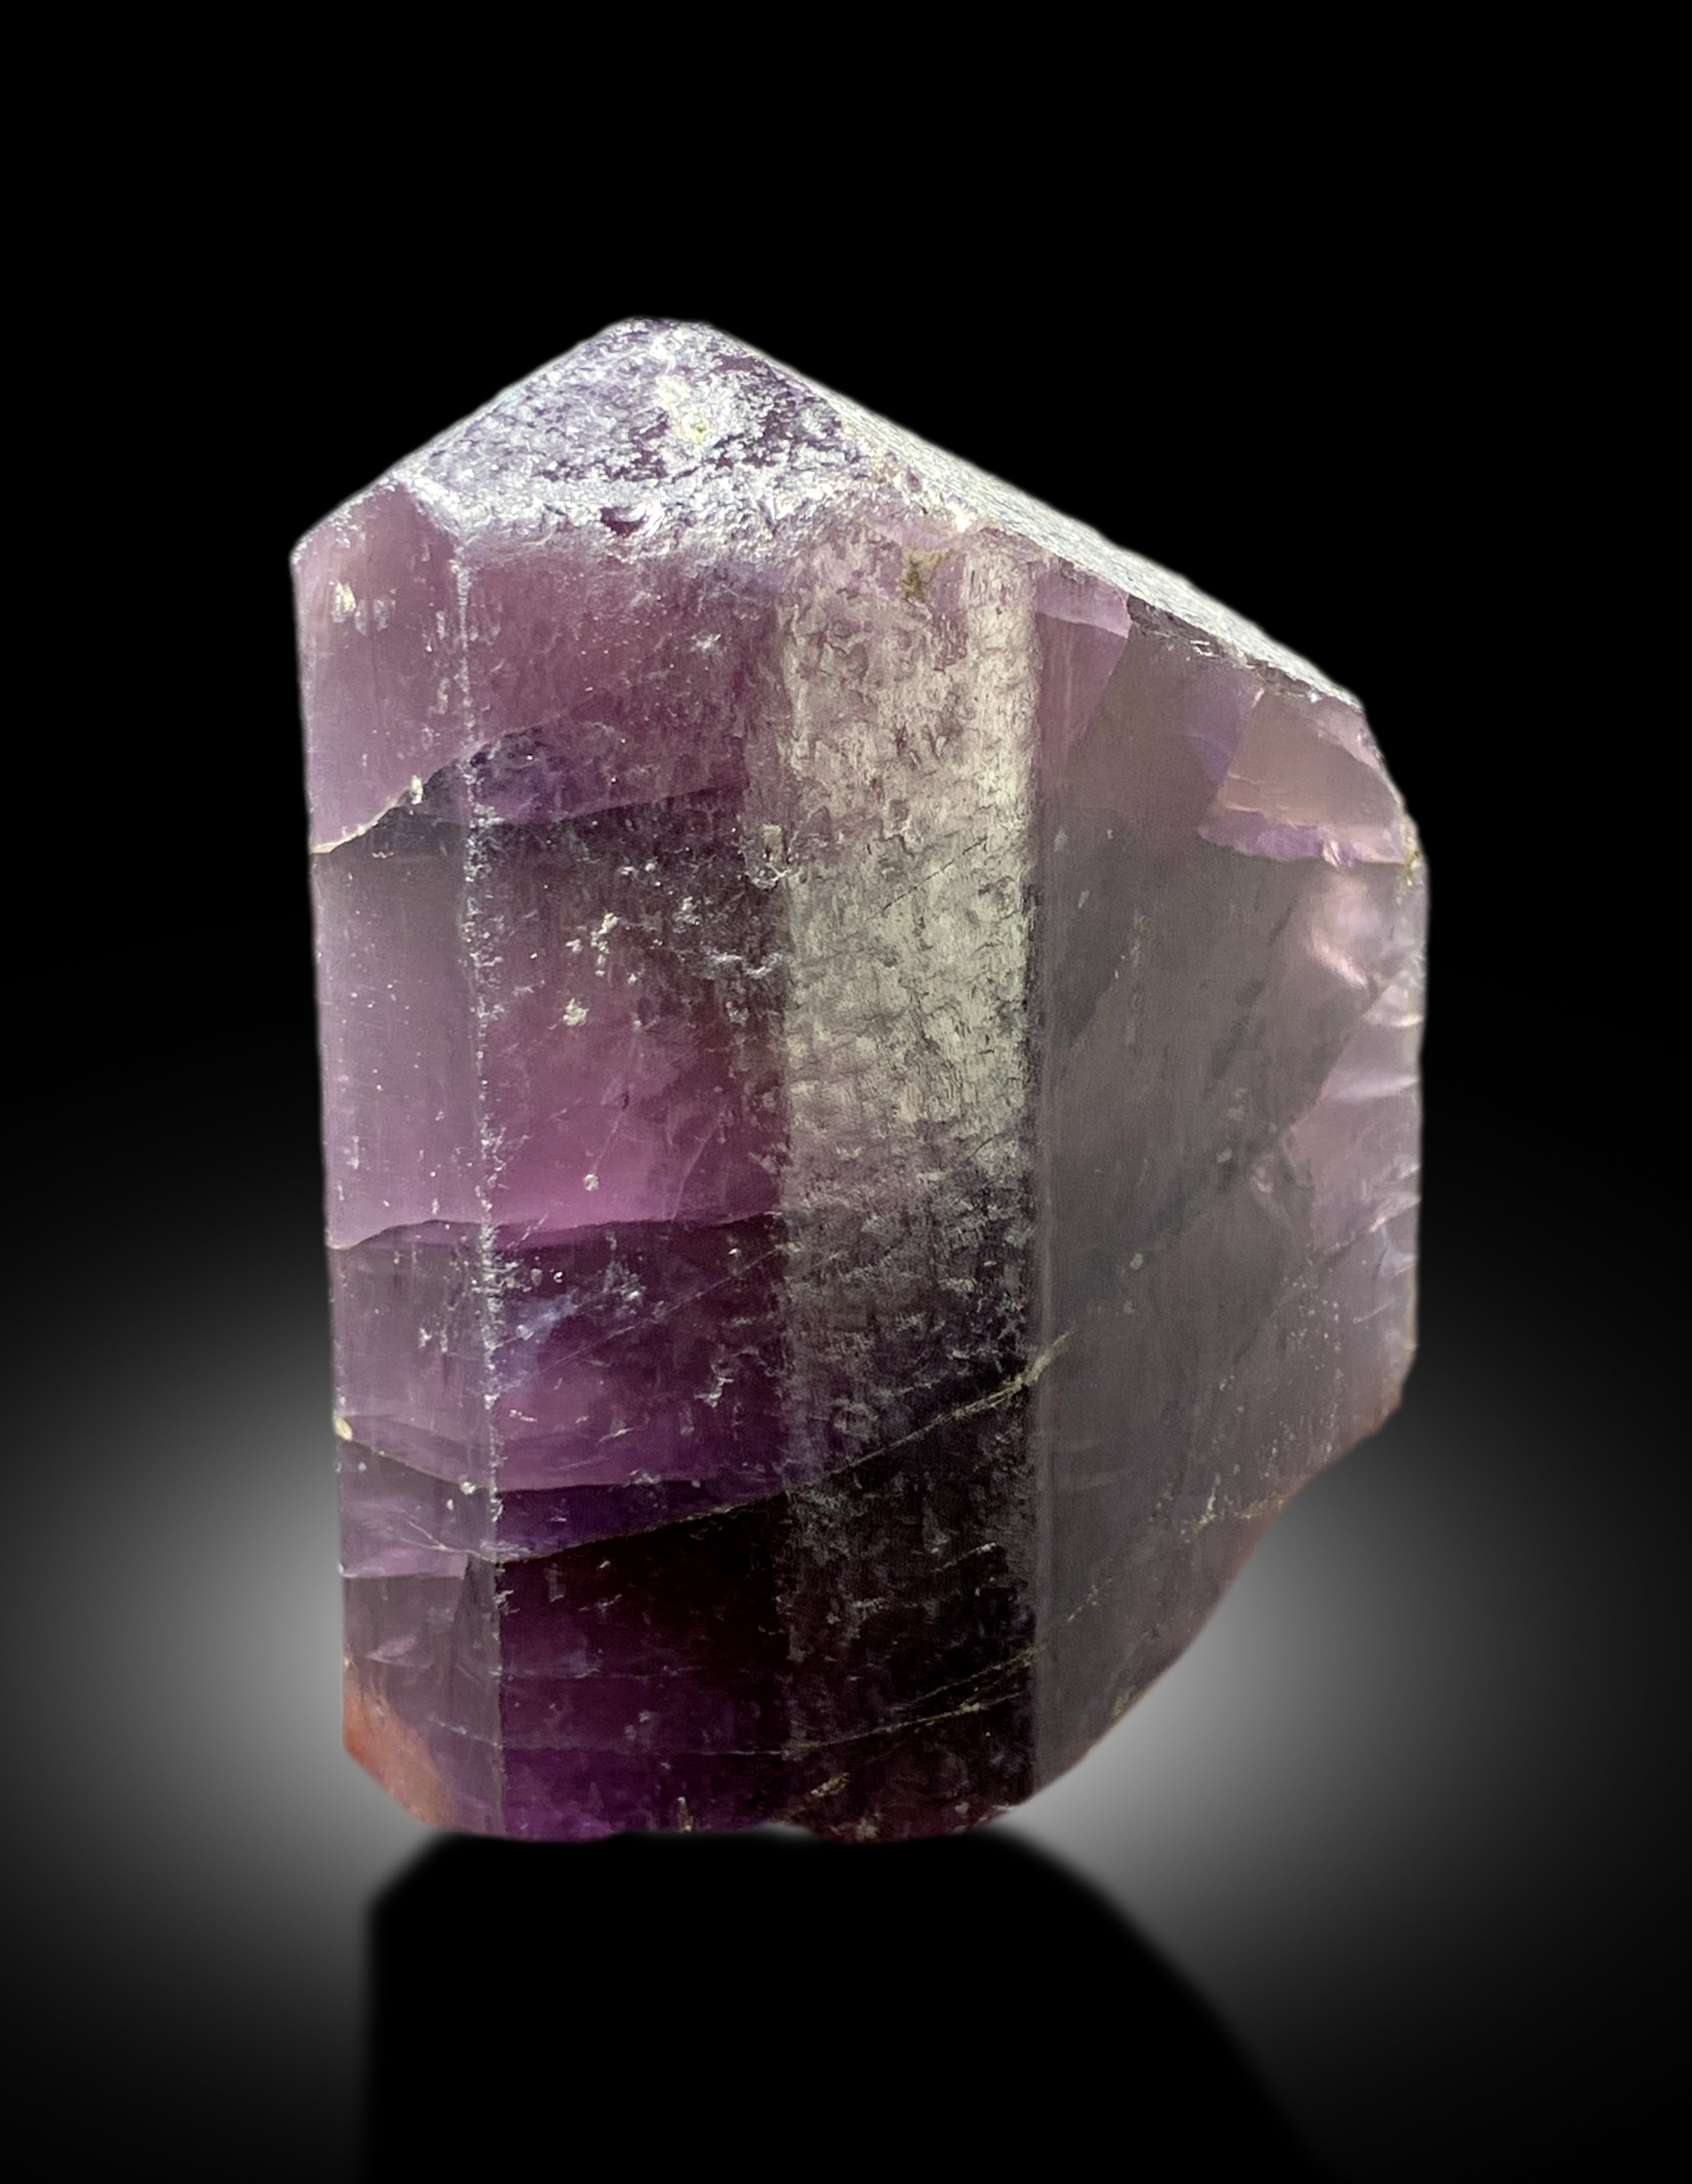 Natural Rich Purple Color Scapolite Crystal, Scapolite Stone, Scapolite Specimen, Raw Mineral, Scapolite from Afghanistan - 308 gram